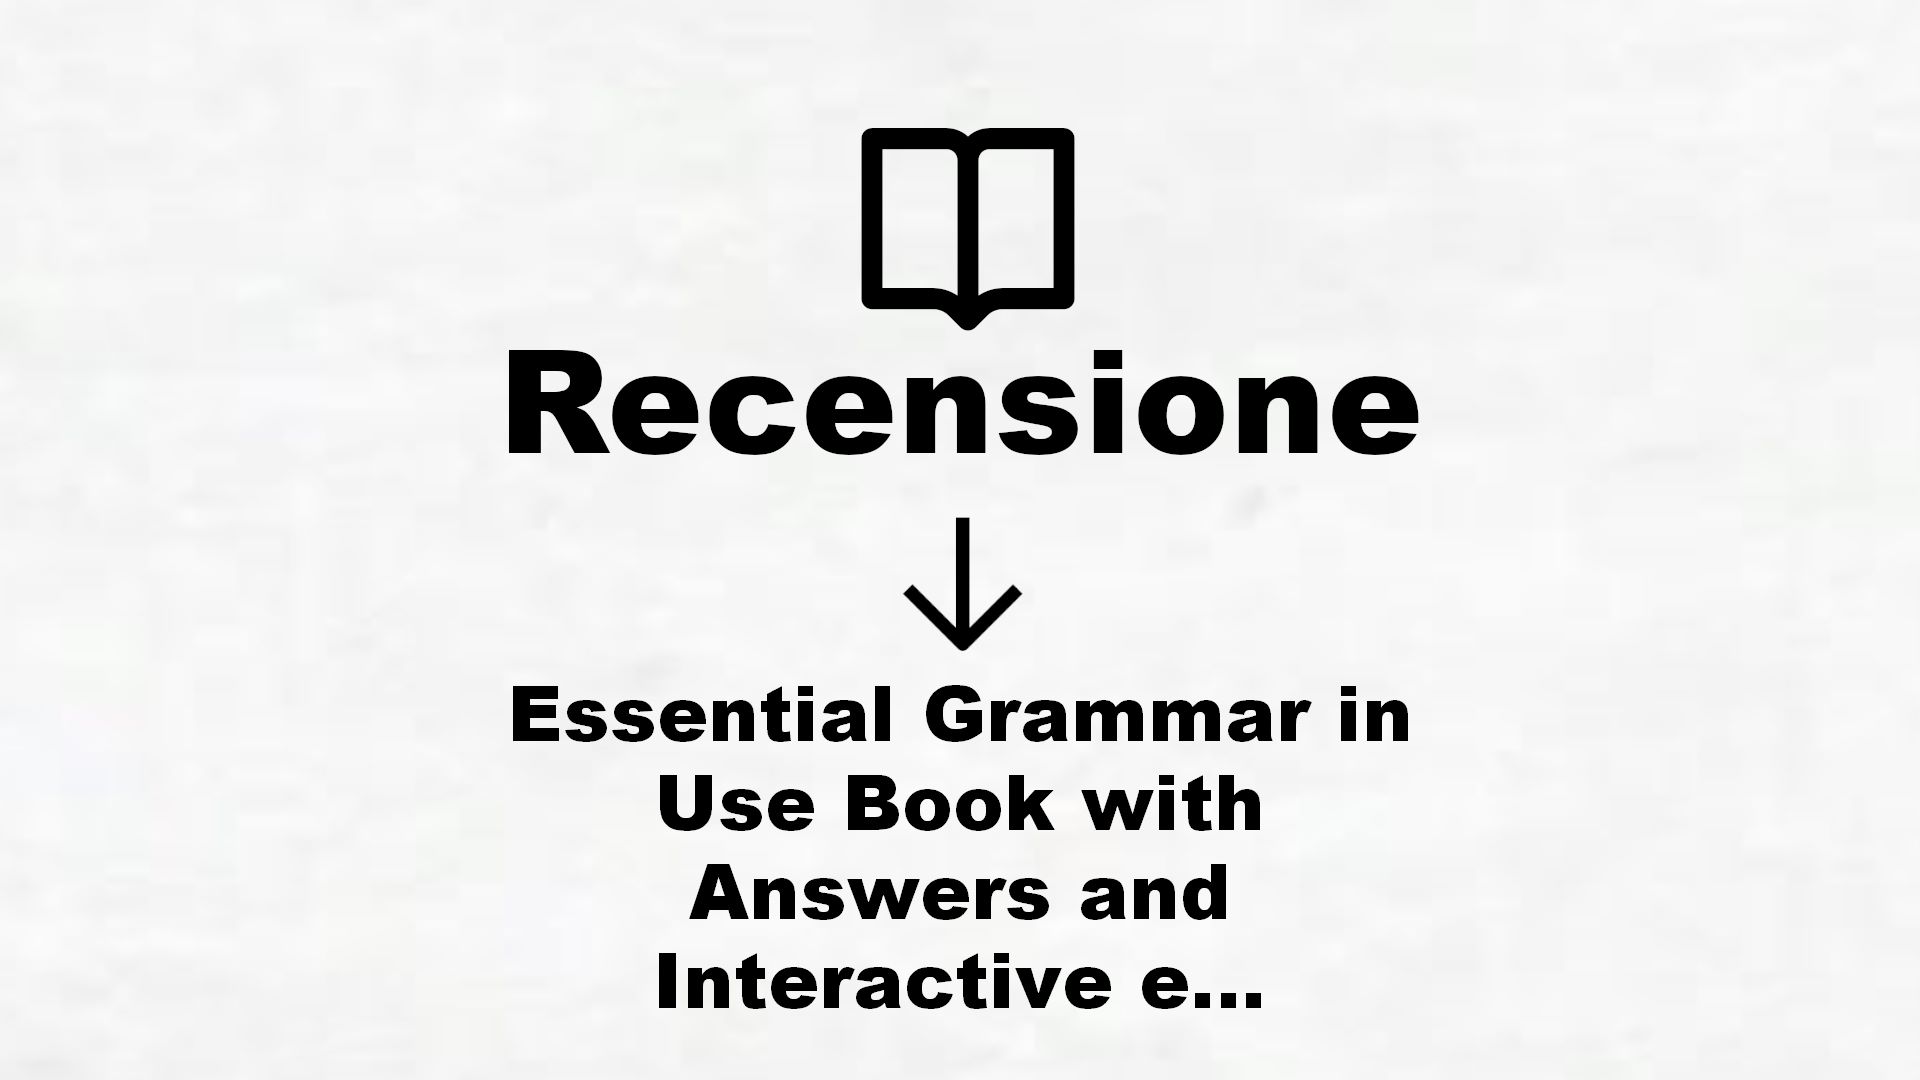 Essential Grammar in Use Book with Answers and Interactive eBook Italian Edition [Lingua inglese]: 1 – Recensione Libro